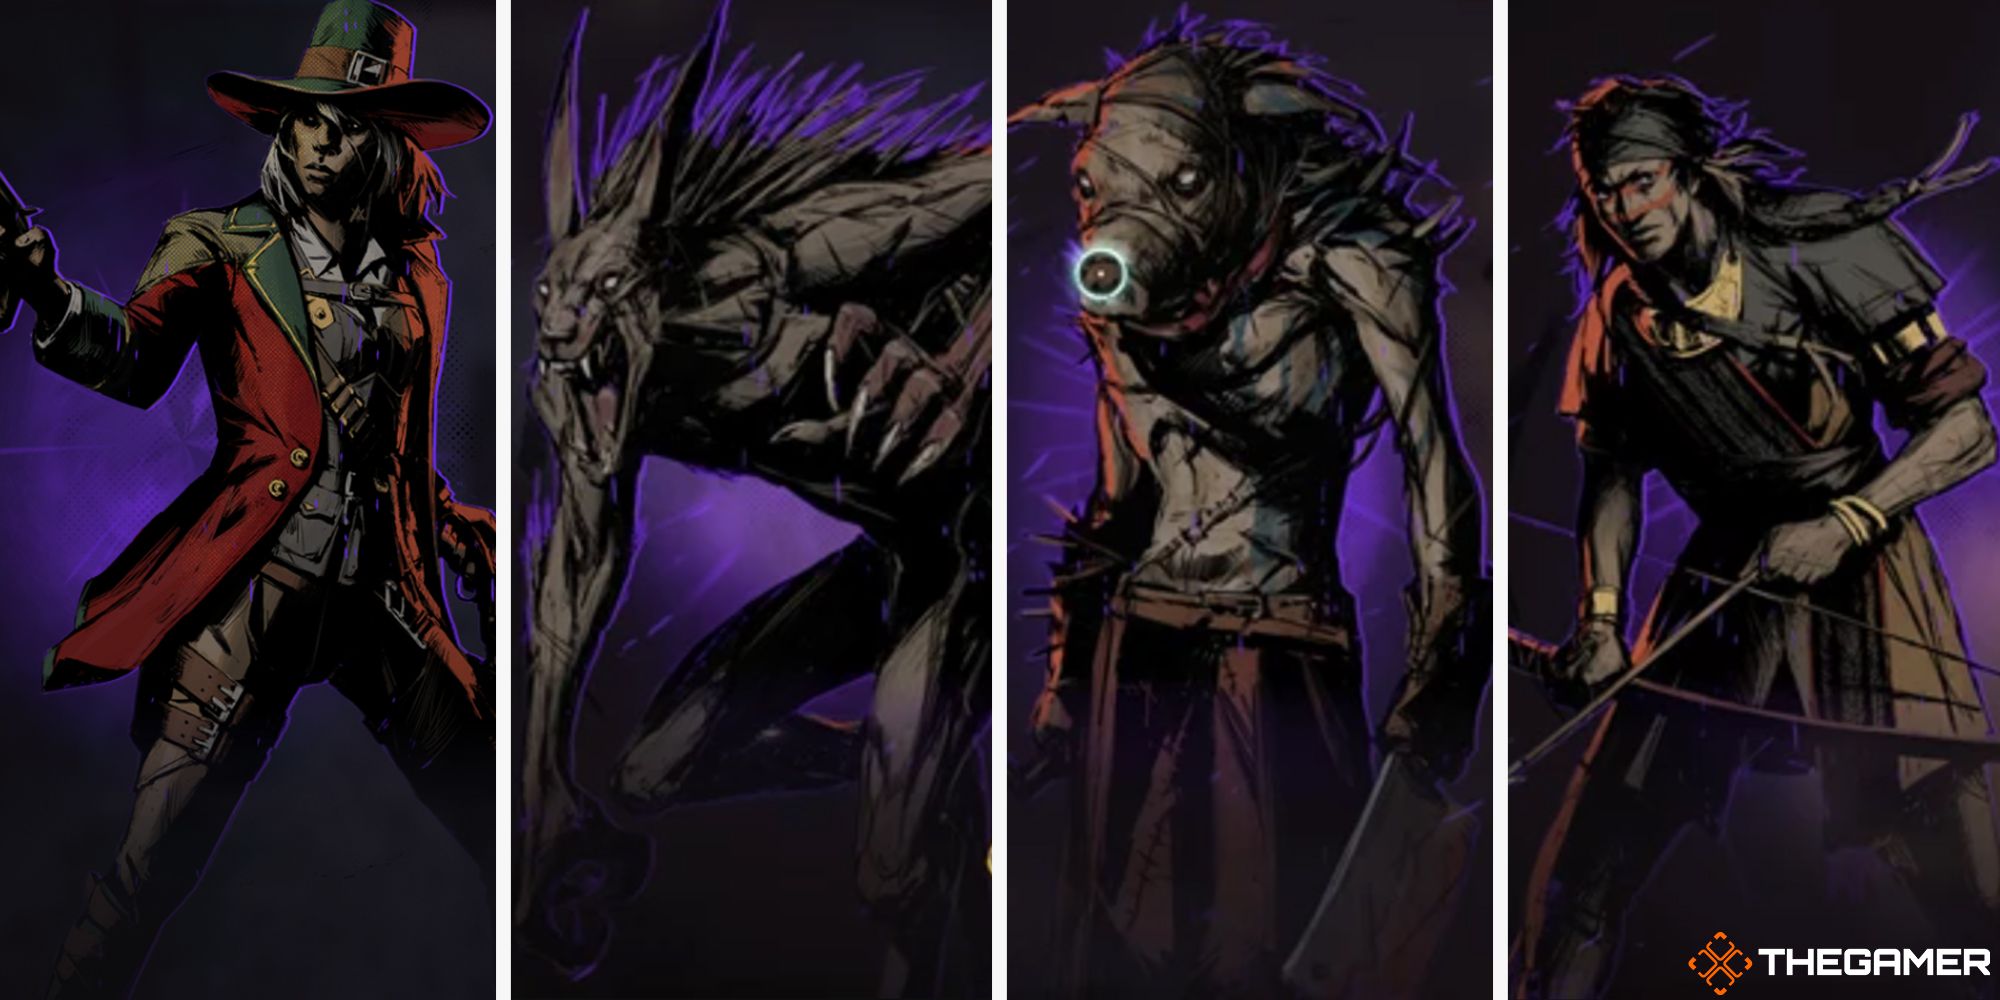 Featured Image of The Bounty Hunter, The Werewolf, The Pigman, and The Protector from Weird West